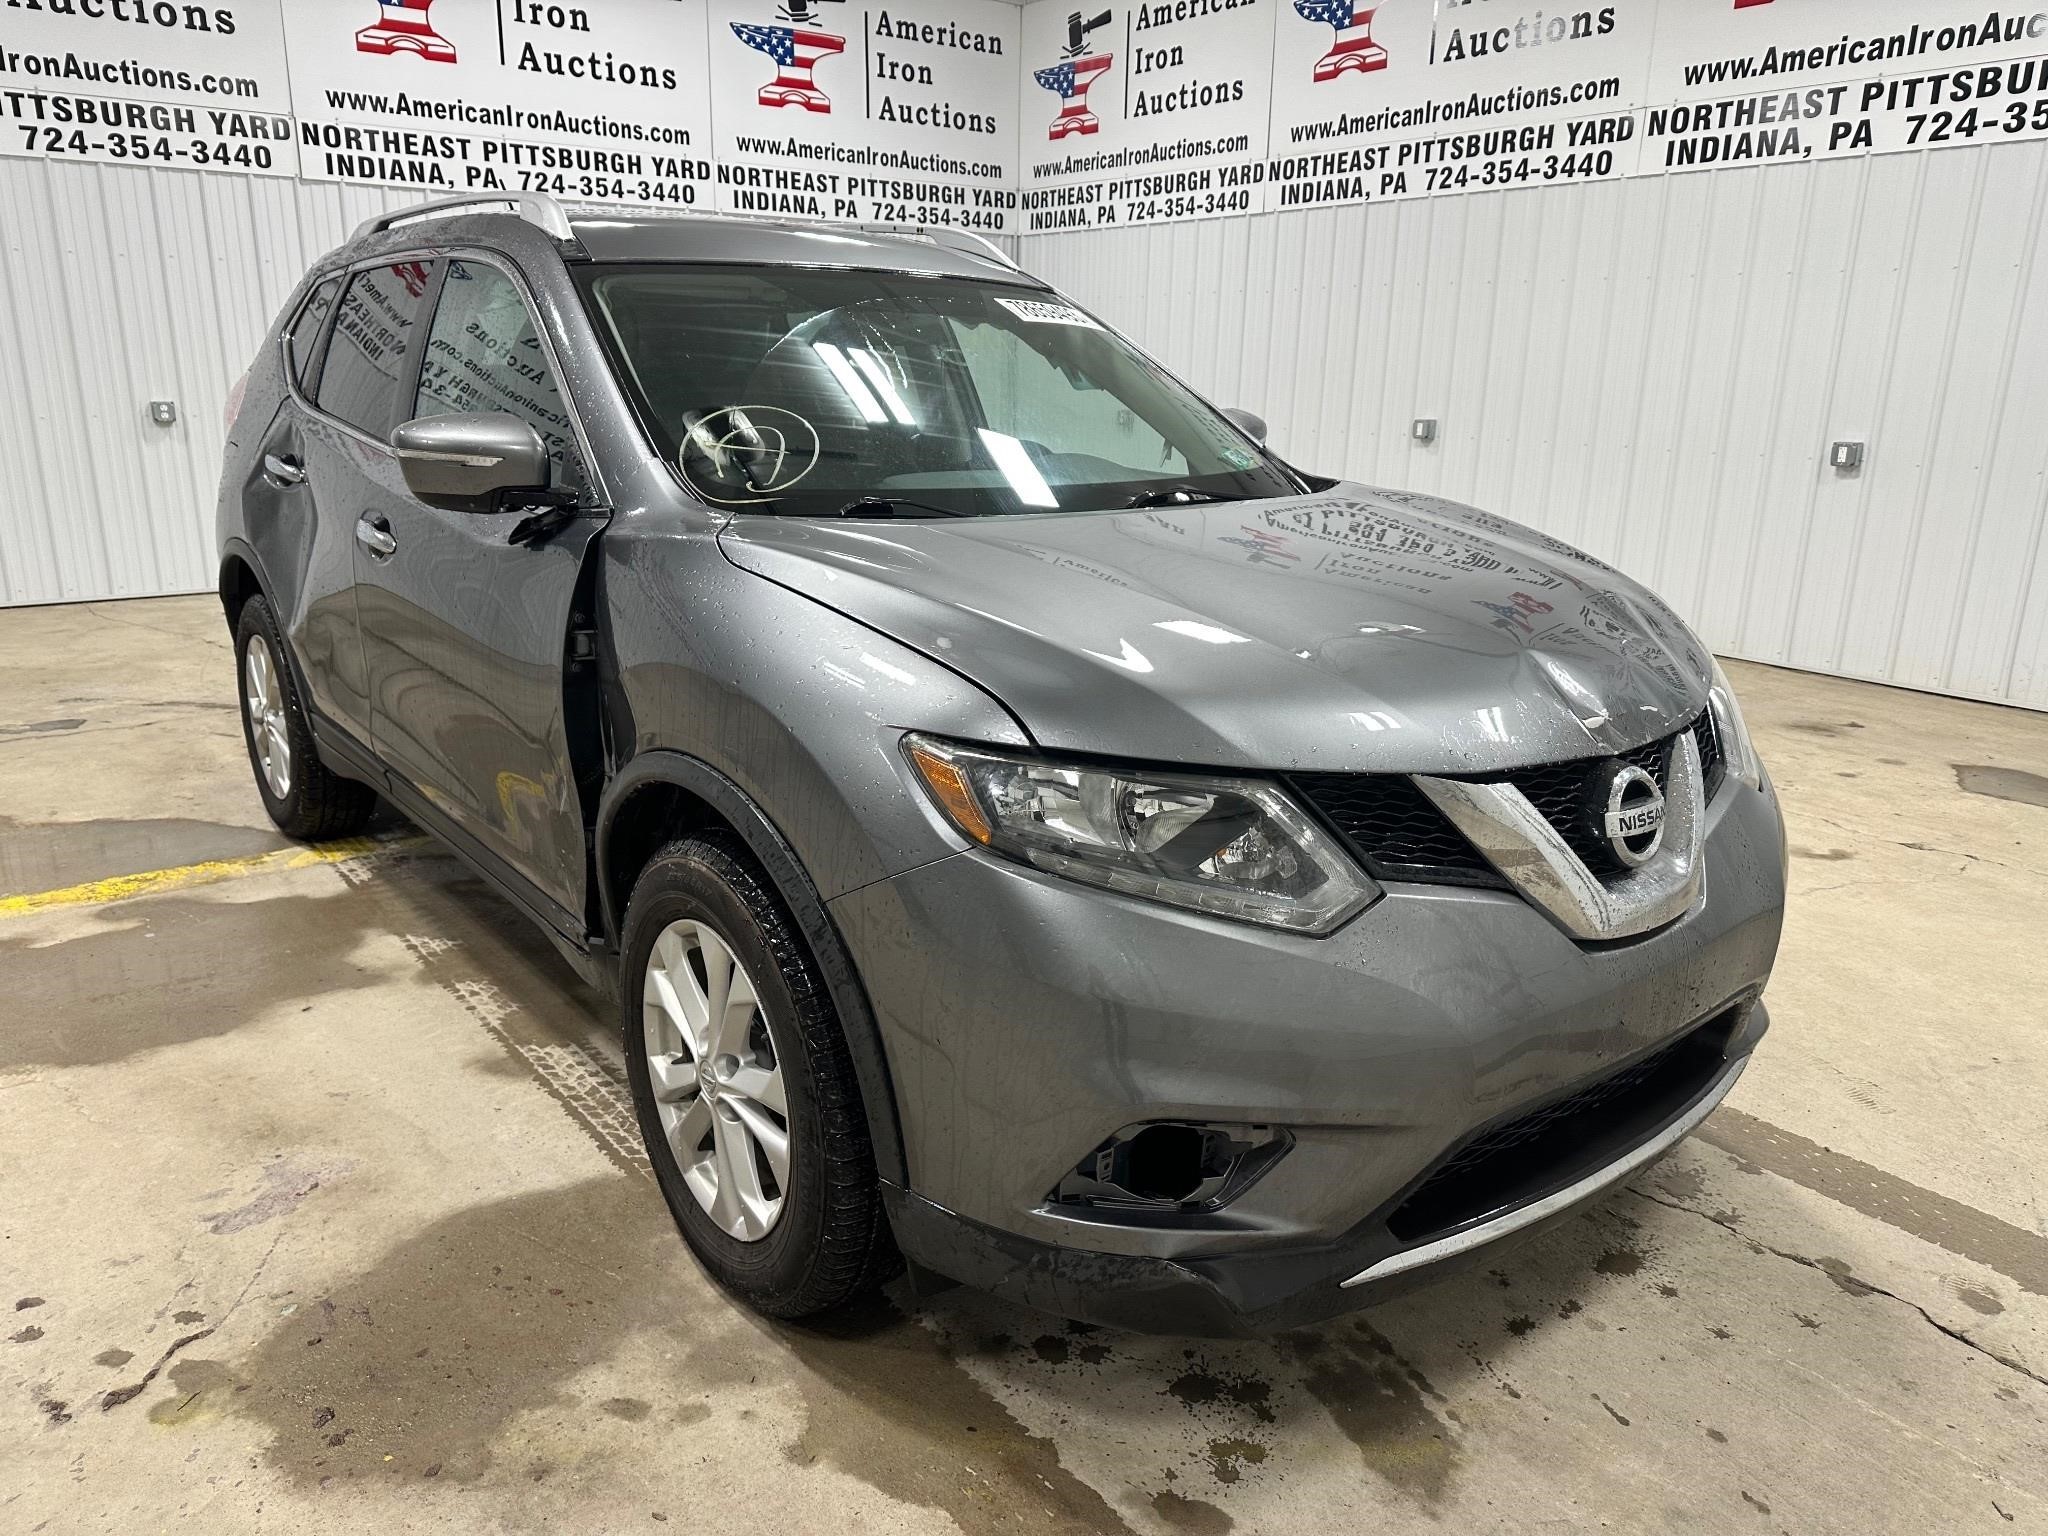 2015 Nissan Rogue SUV-Certificate of Salvage